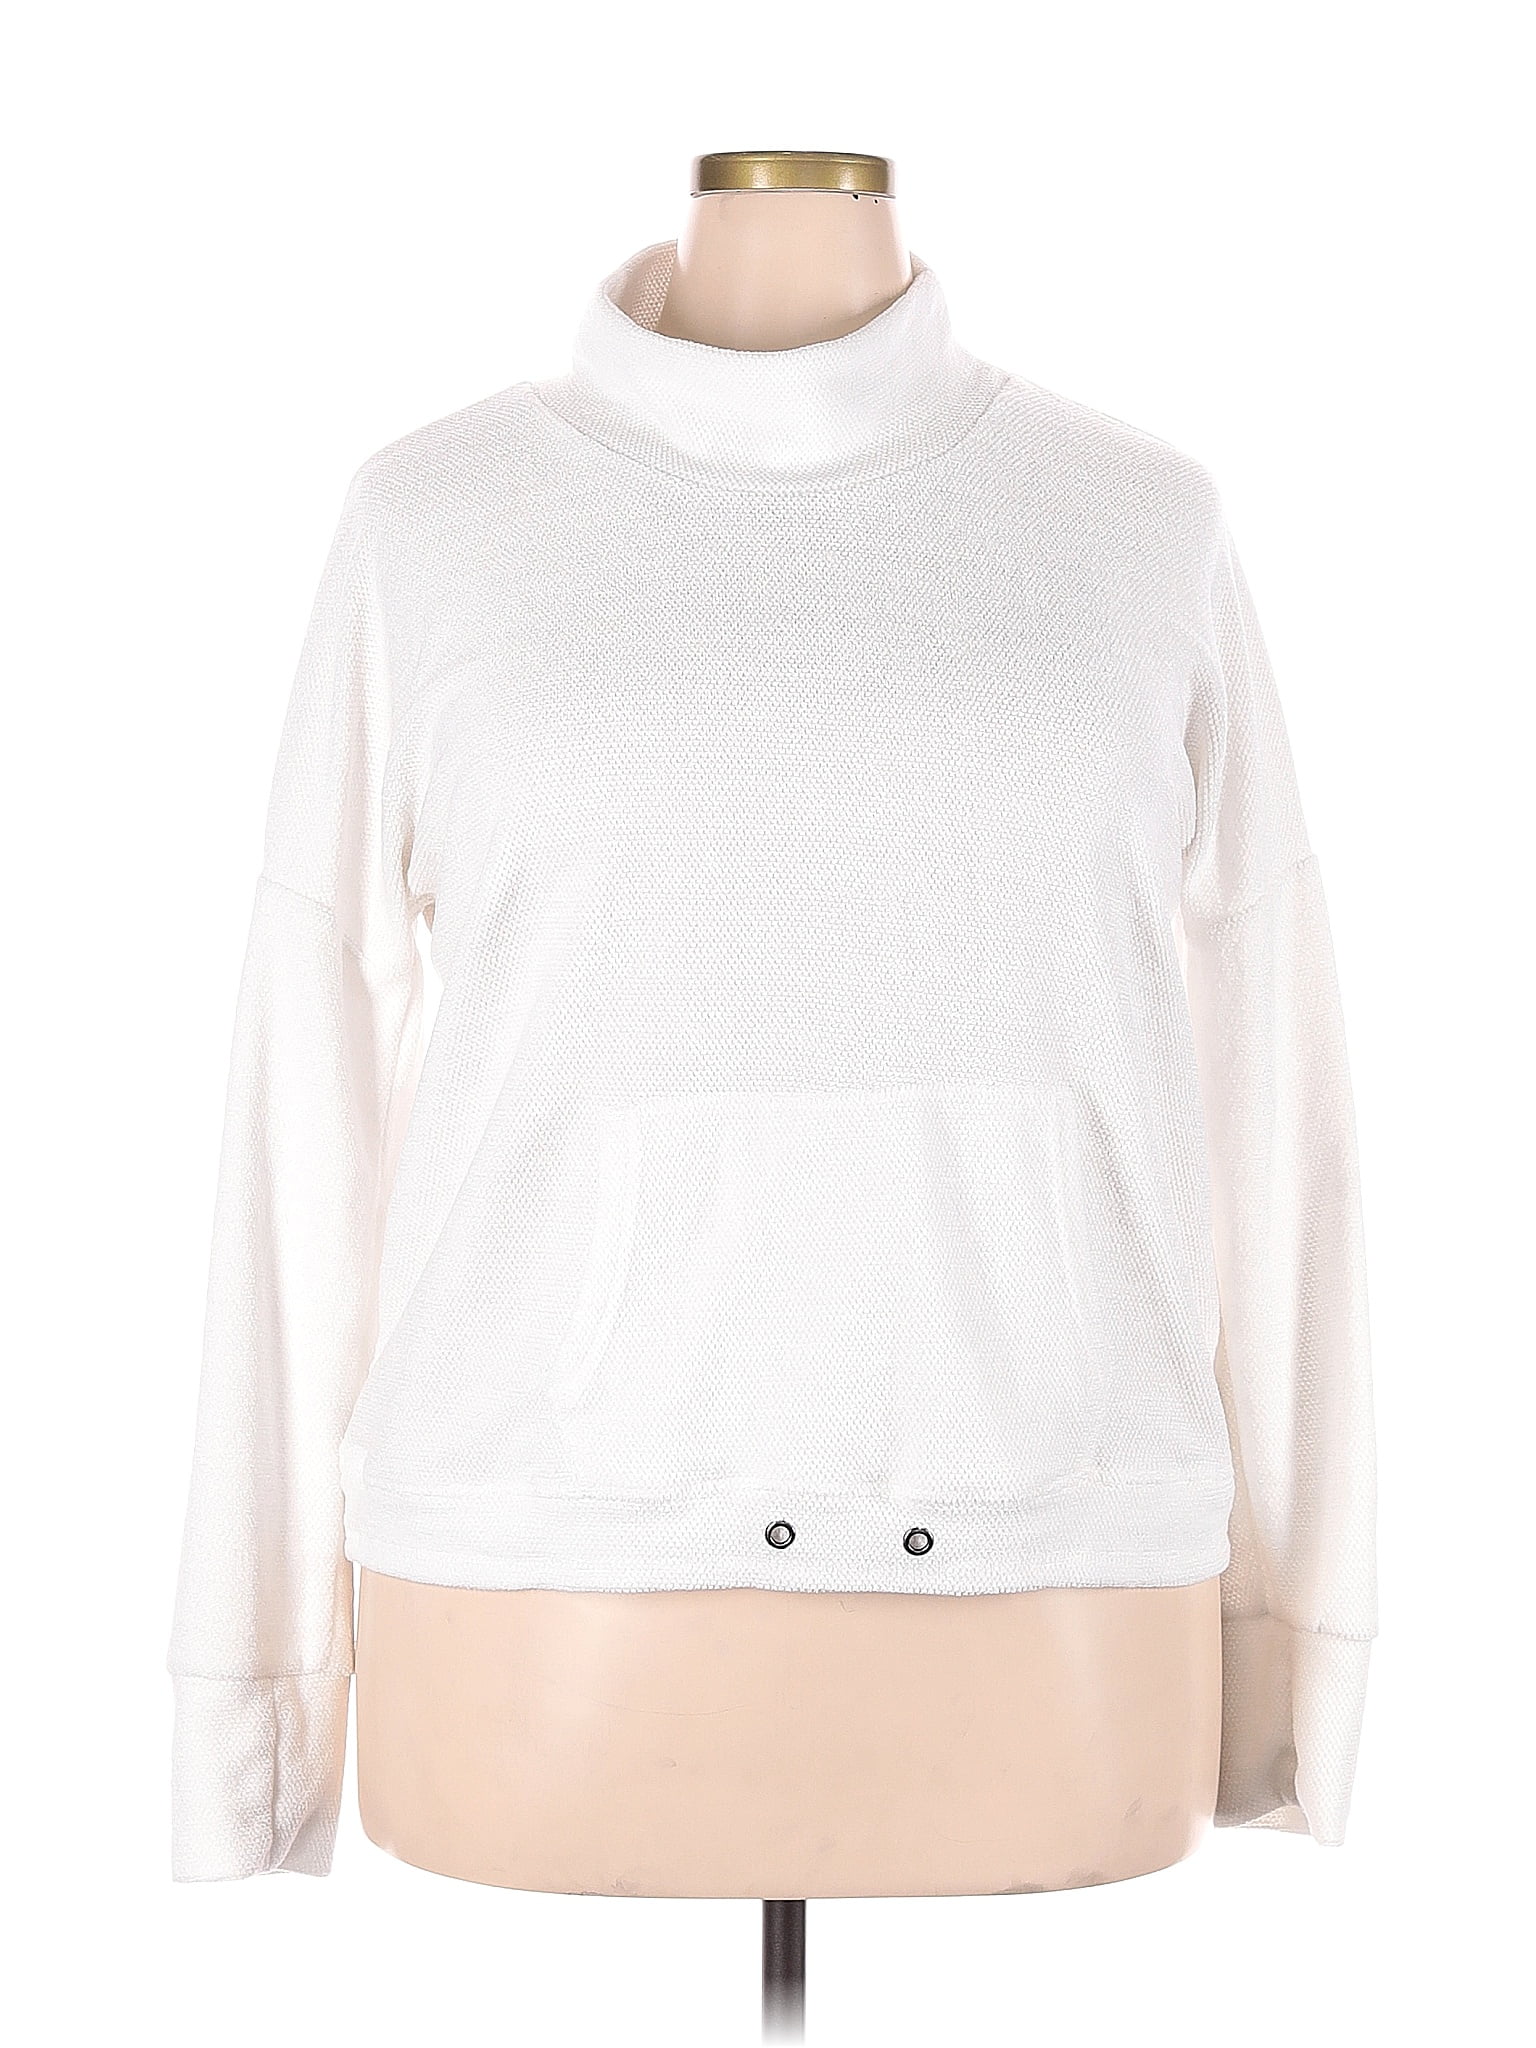 Zyia Active 100% Polyester Color Block Solid White Sweatshirt Size XXL -  63% off